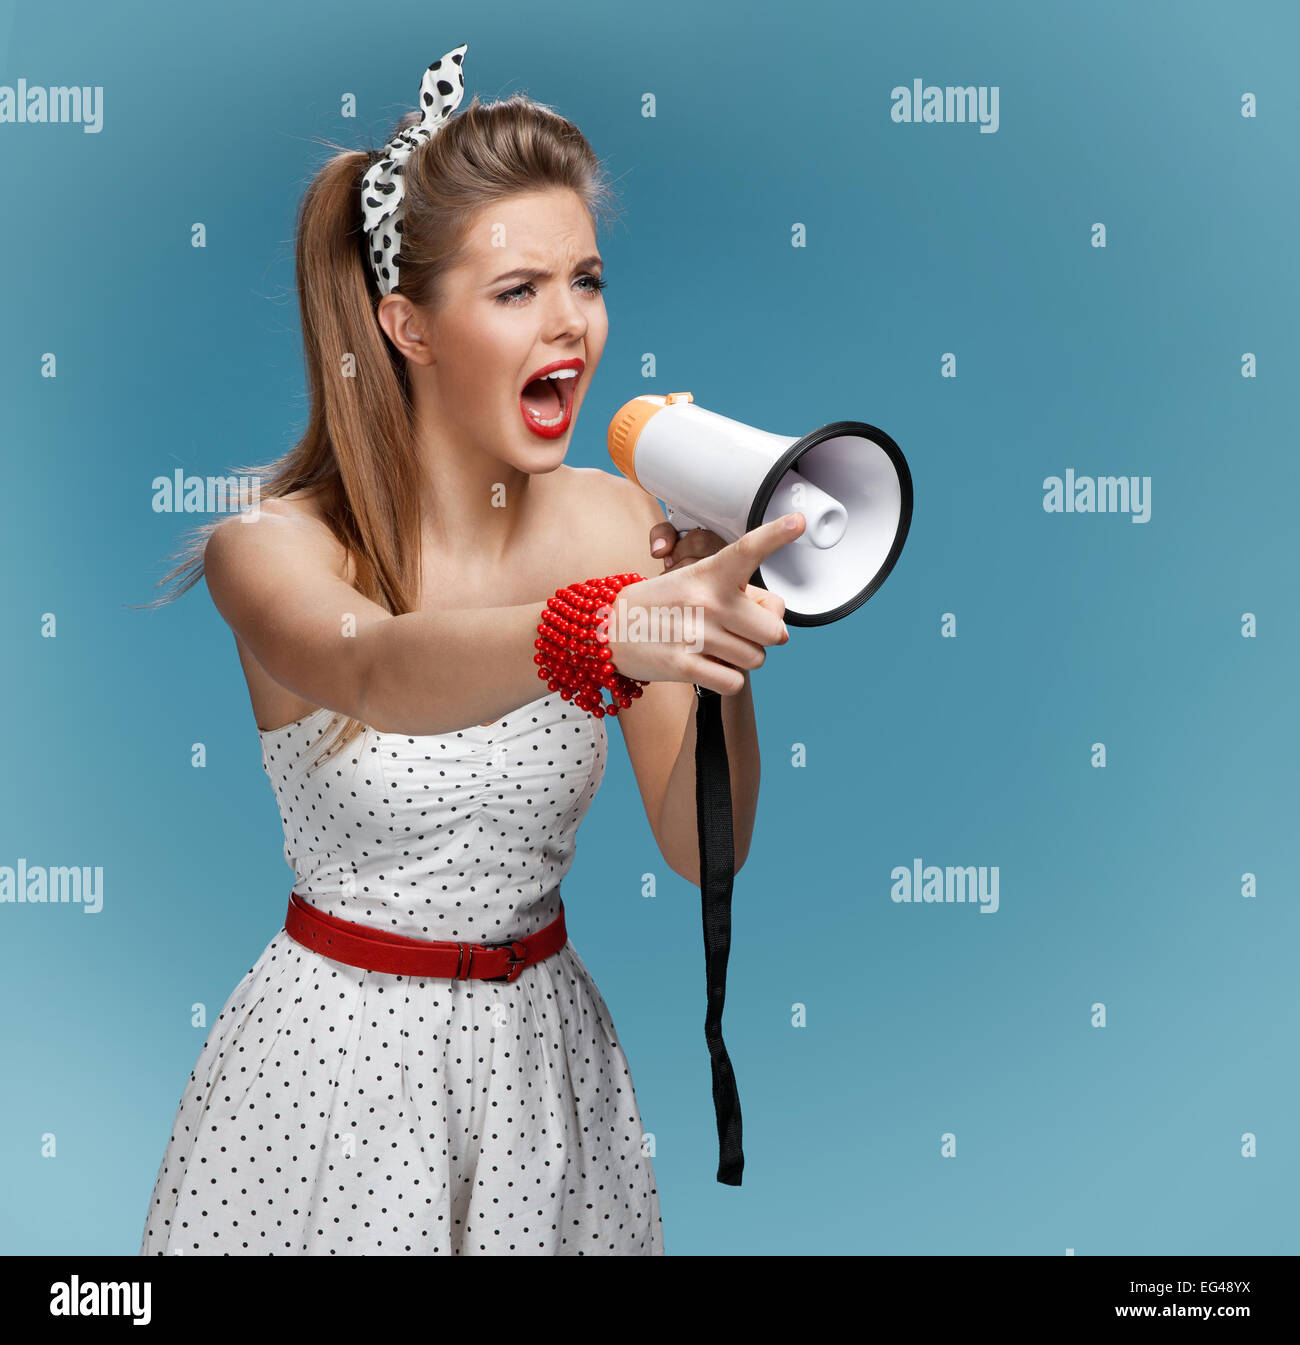 Angry pin-up girl shouting into a megaphone, mouthpiece, speaking trumpet. Filmmaking or film production concept Stock Photo